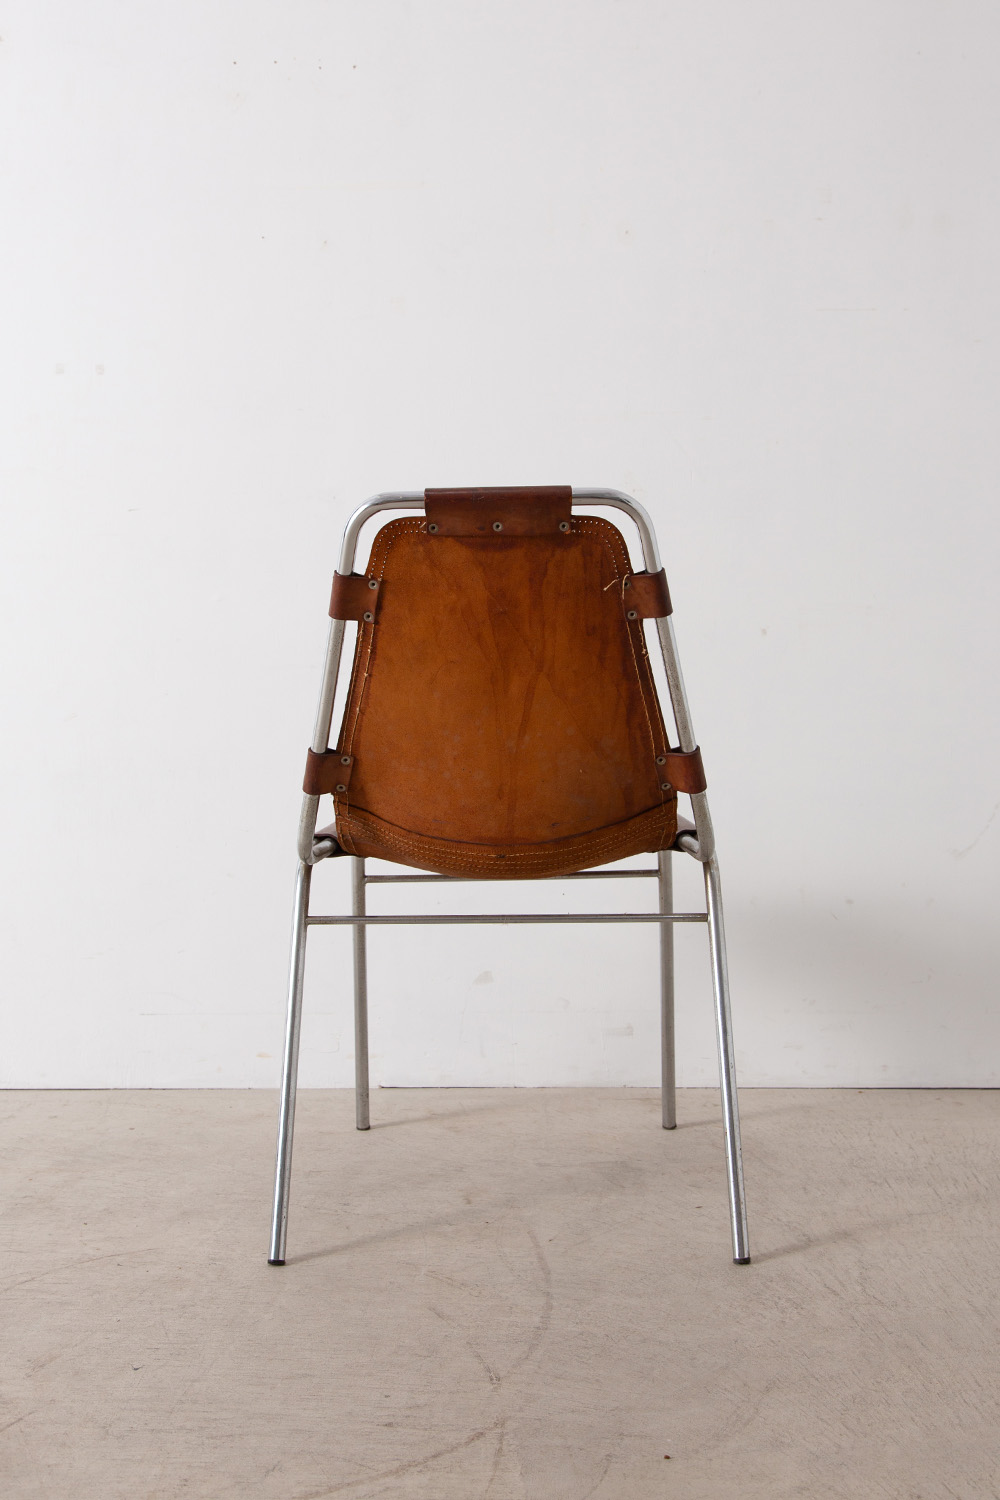 Les arcs Chair in Leather and Steel by Charlotte Perriand